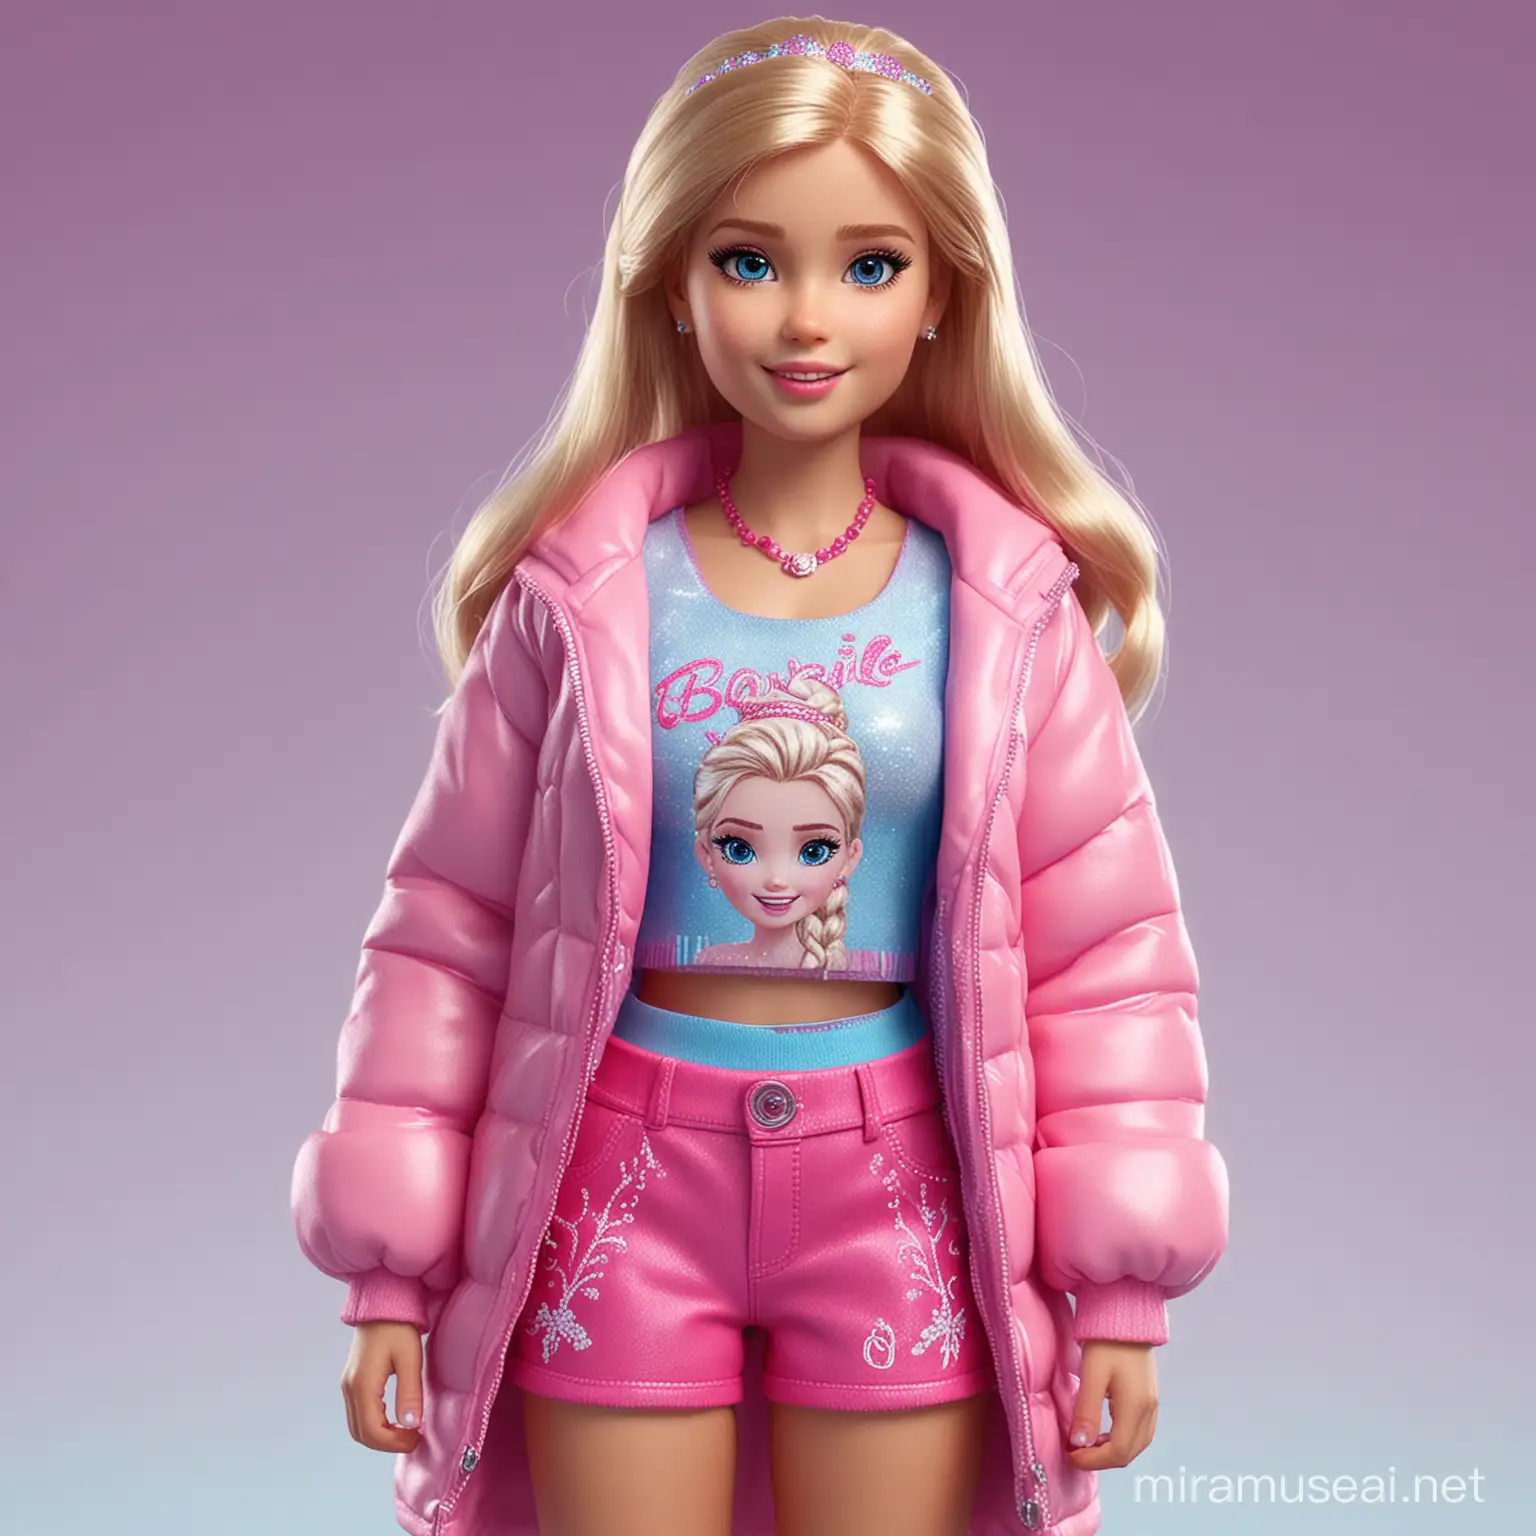 hyper realistic girl 10 year old in barbie stijl and frozen outfit full body shot ultra details, facing camera, frozen outfit, full body shot